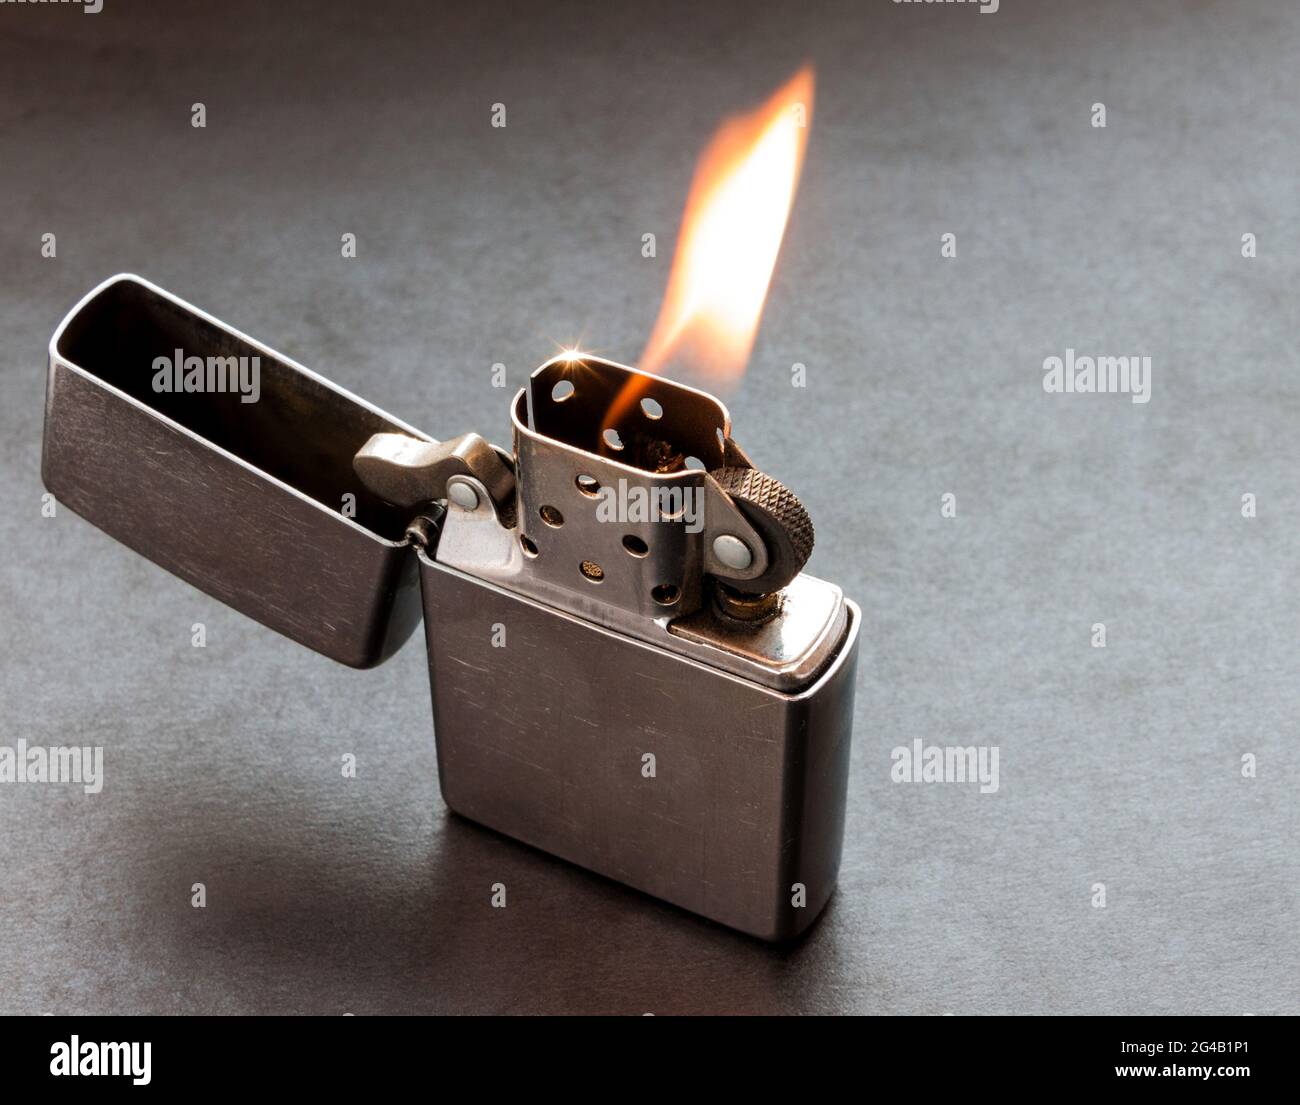 Silver metal lighter on black background with flame. Stock Photo